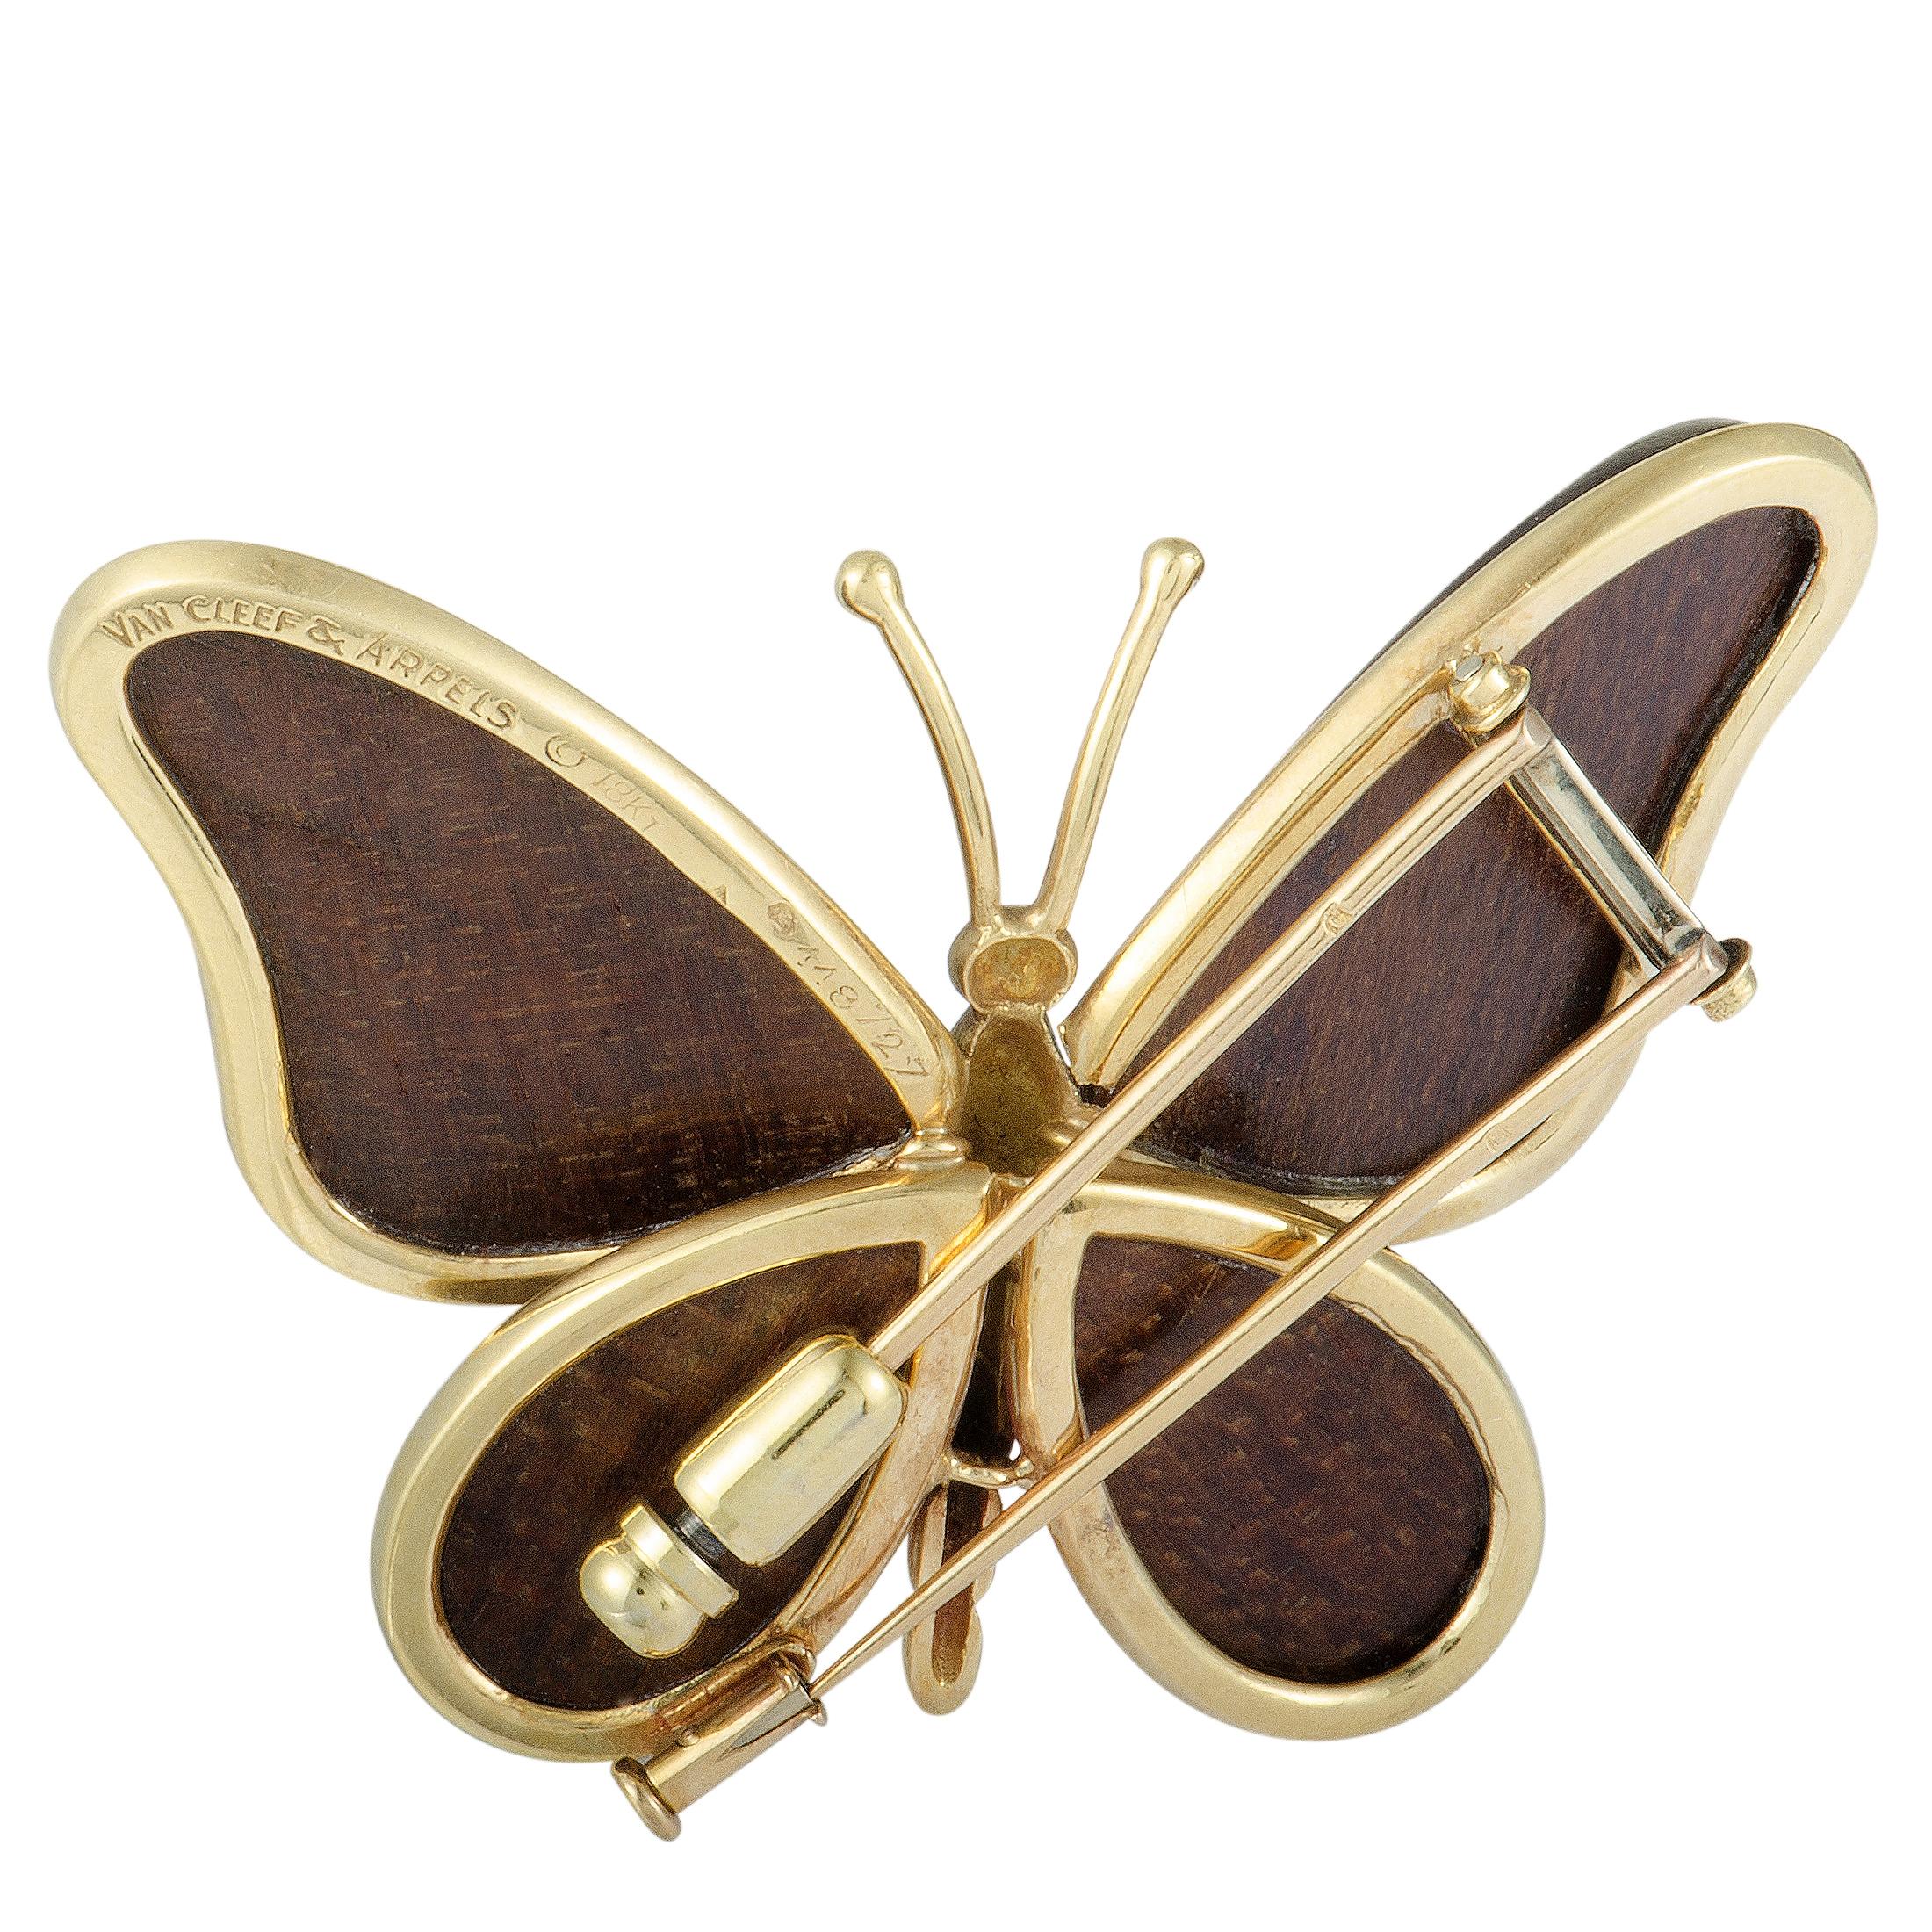 This elegant butterfly brooch is an extremely rare item designed by Van Cleef & Arpels for their vintage wood collection. The classy antique is expertly designed from beautiful 18K yellow gold and perfectly embellished with bold brown wood.
